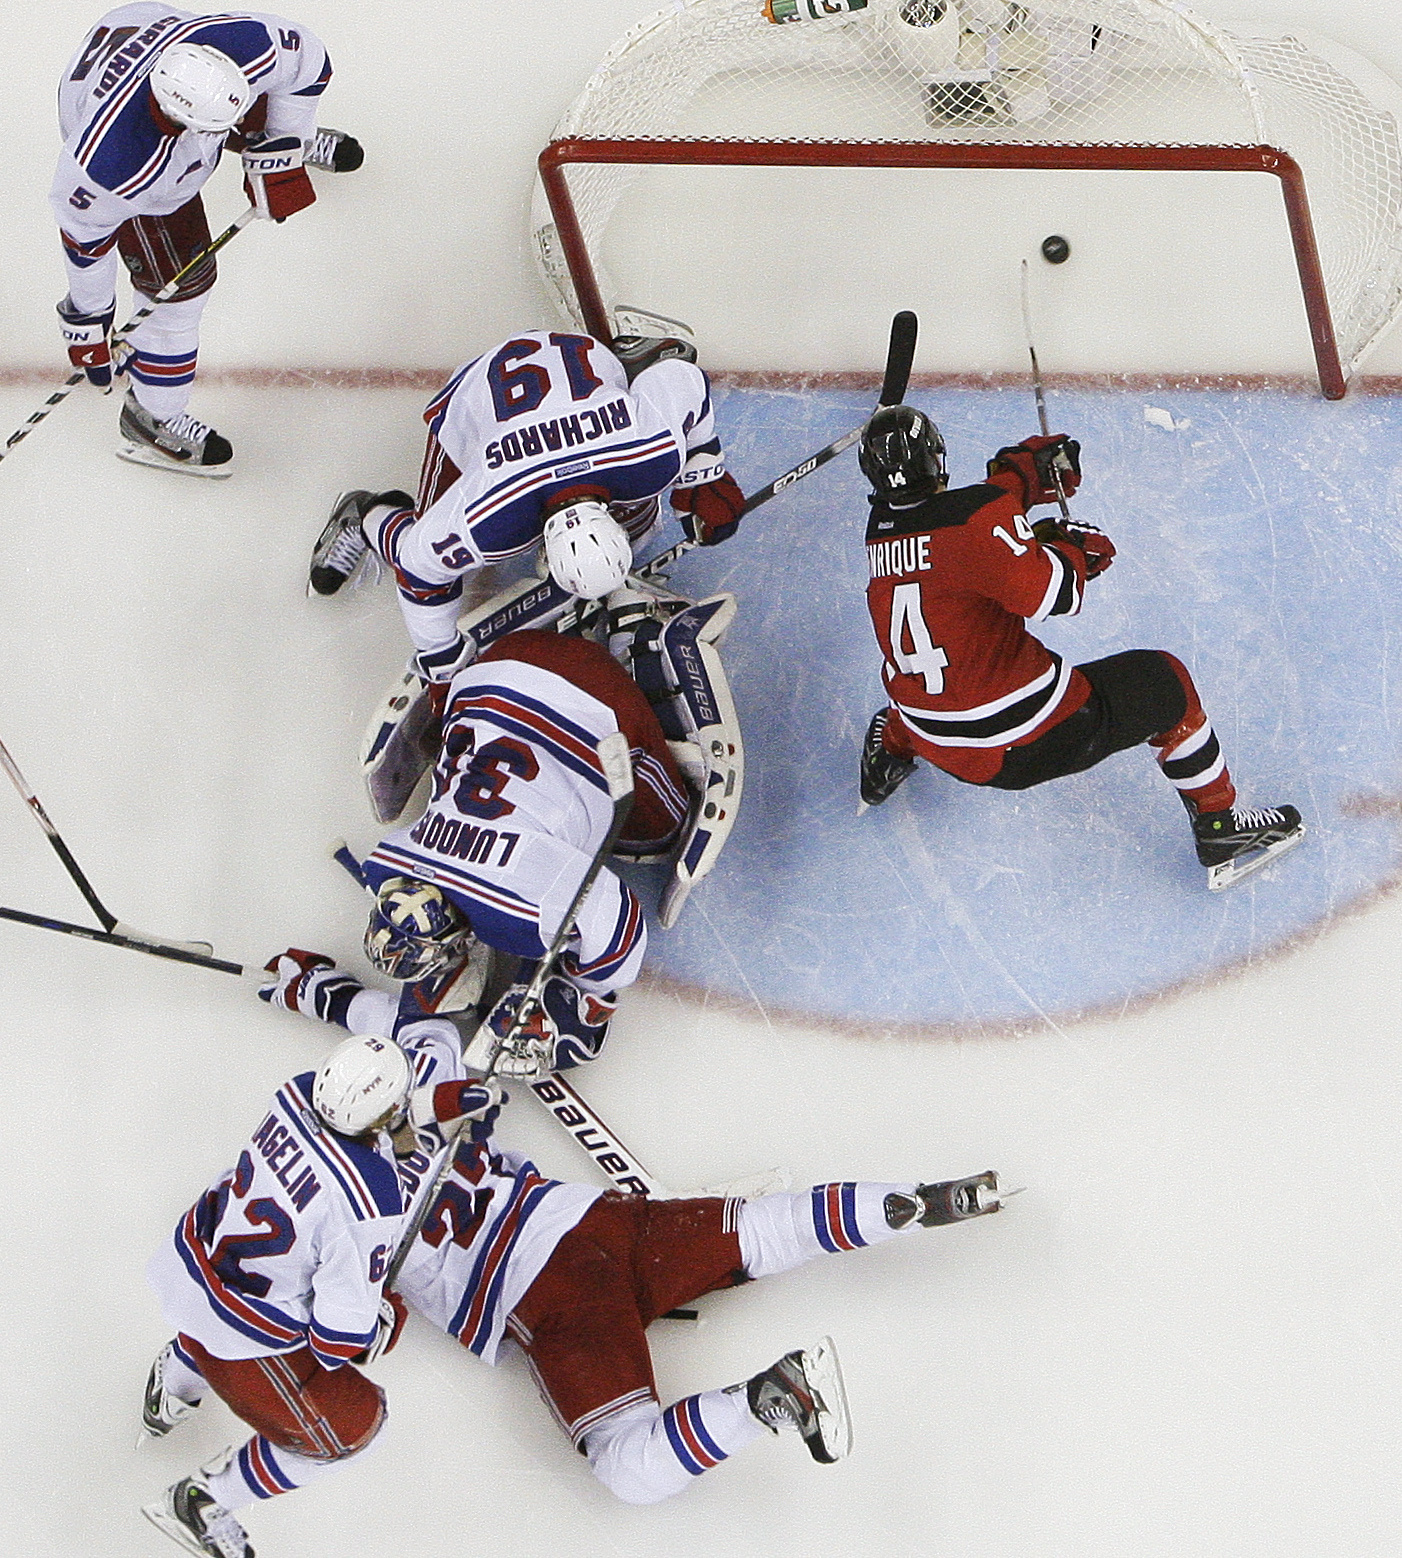 GDT: - ECQF Game 4: Your New Jersey Devils @ New York Rangers, 7